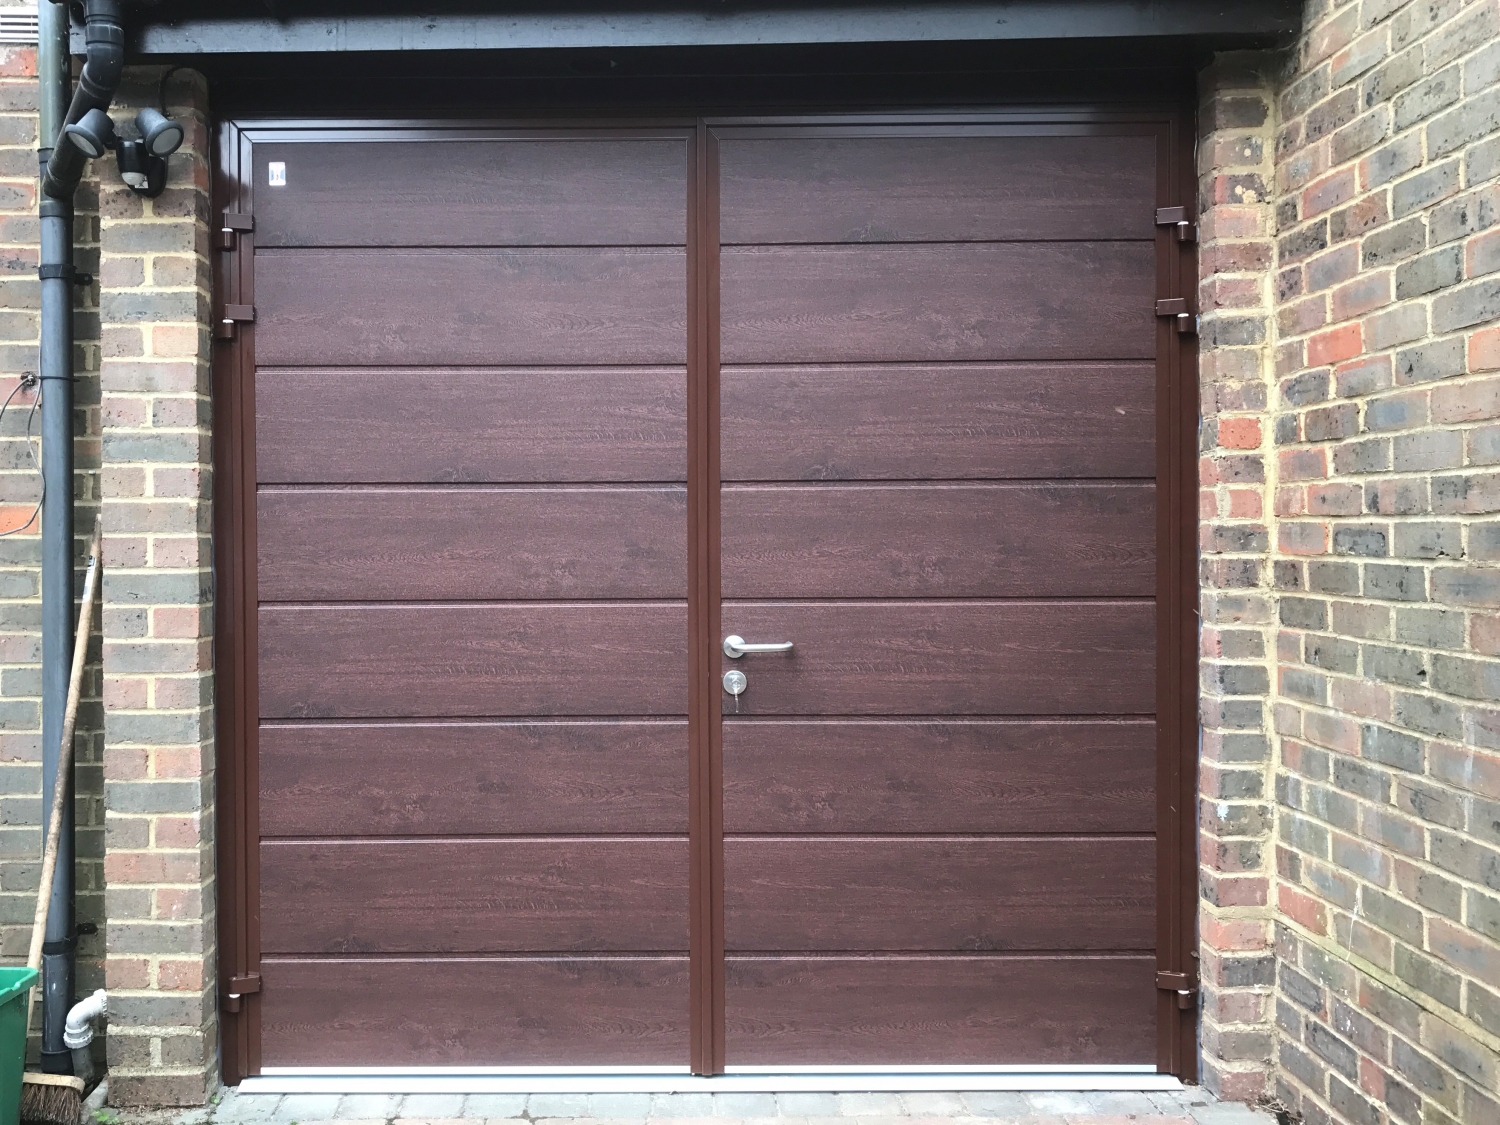 CarTeck GSW 40-L side-hinged doors in centre medium rib in Rosewood finish